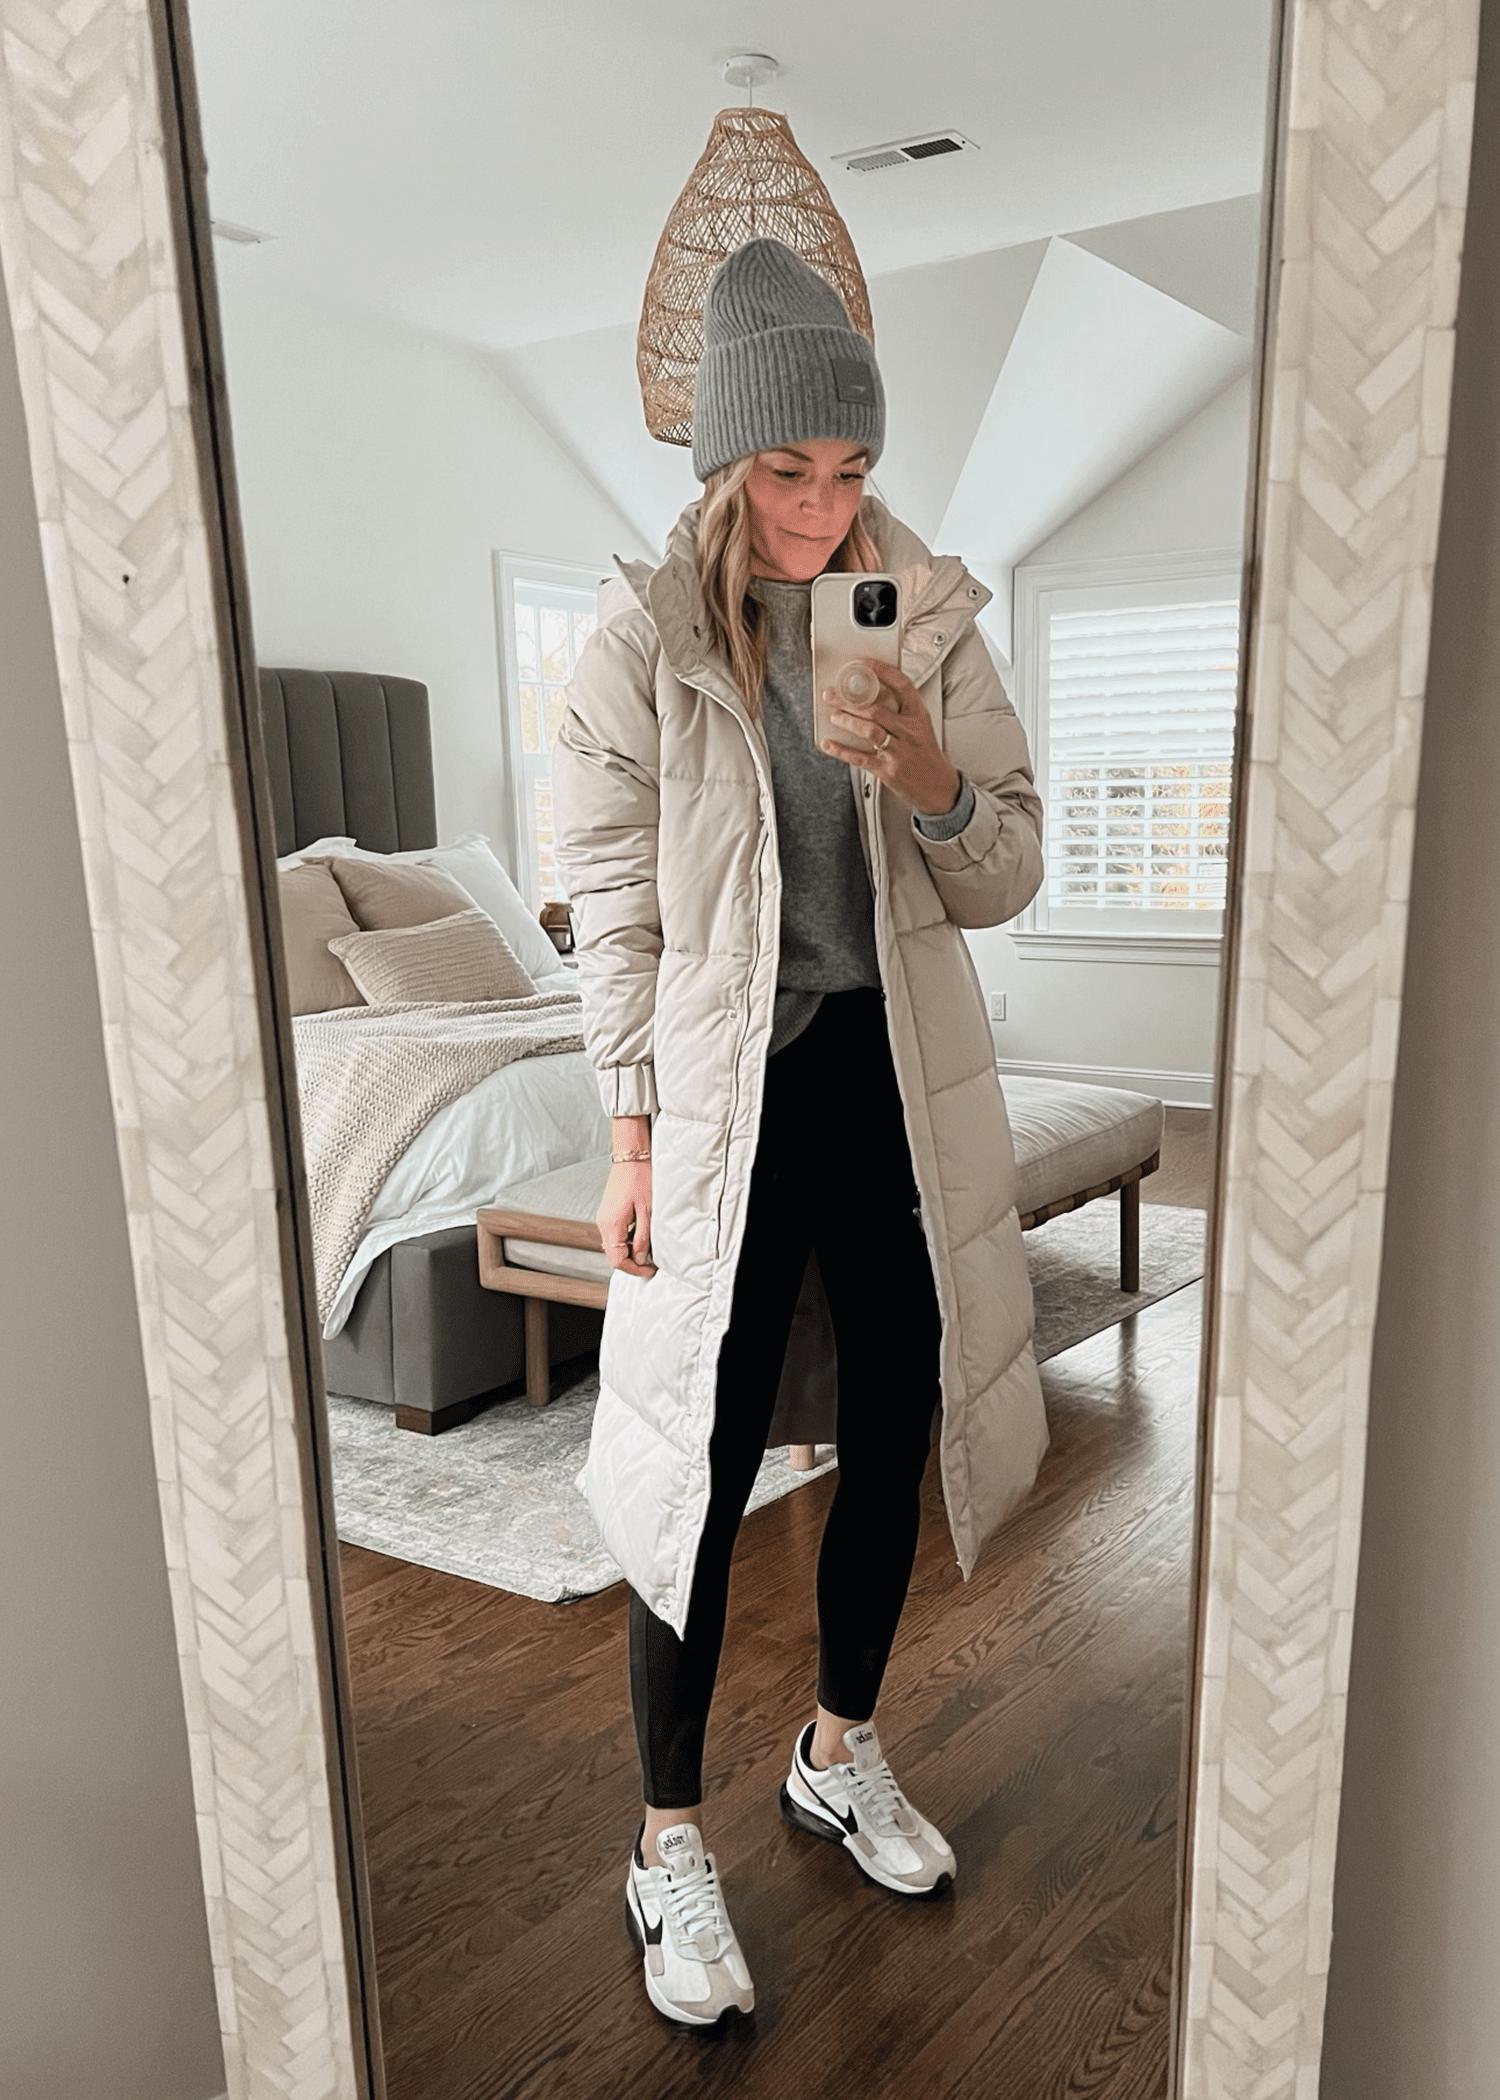 Faculty Drop-Off Outfits – Styled Snapshots